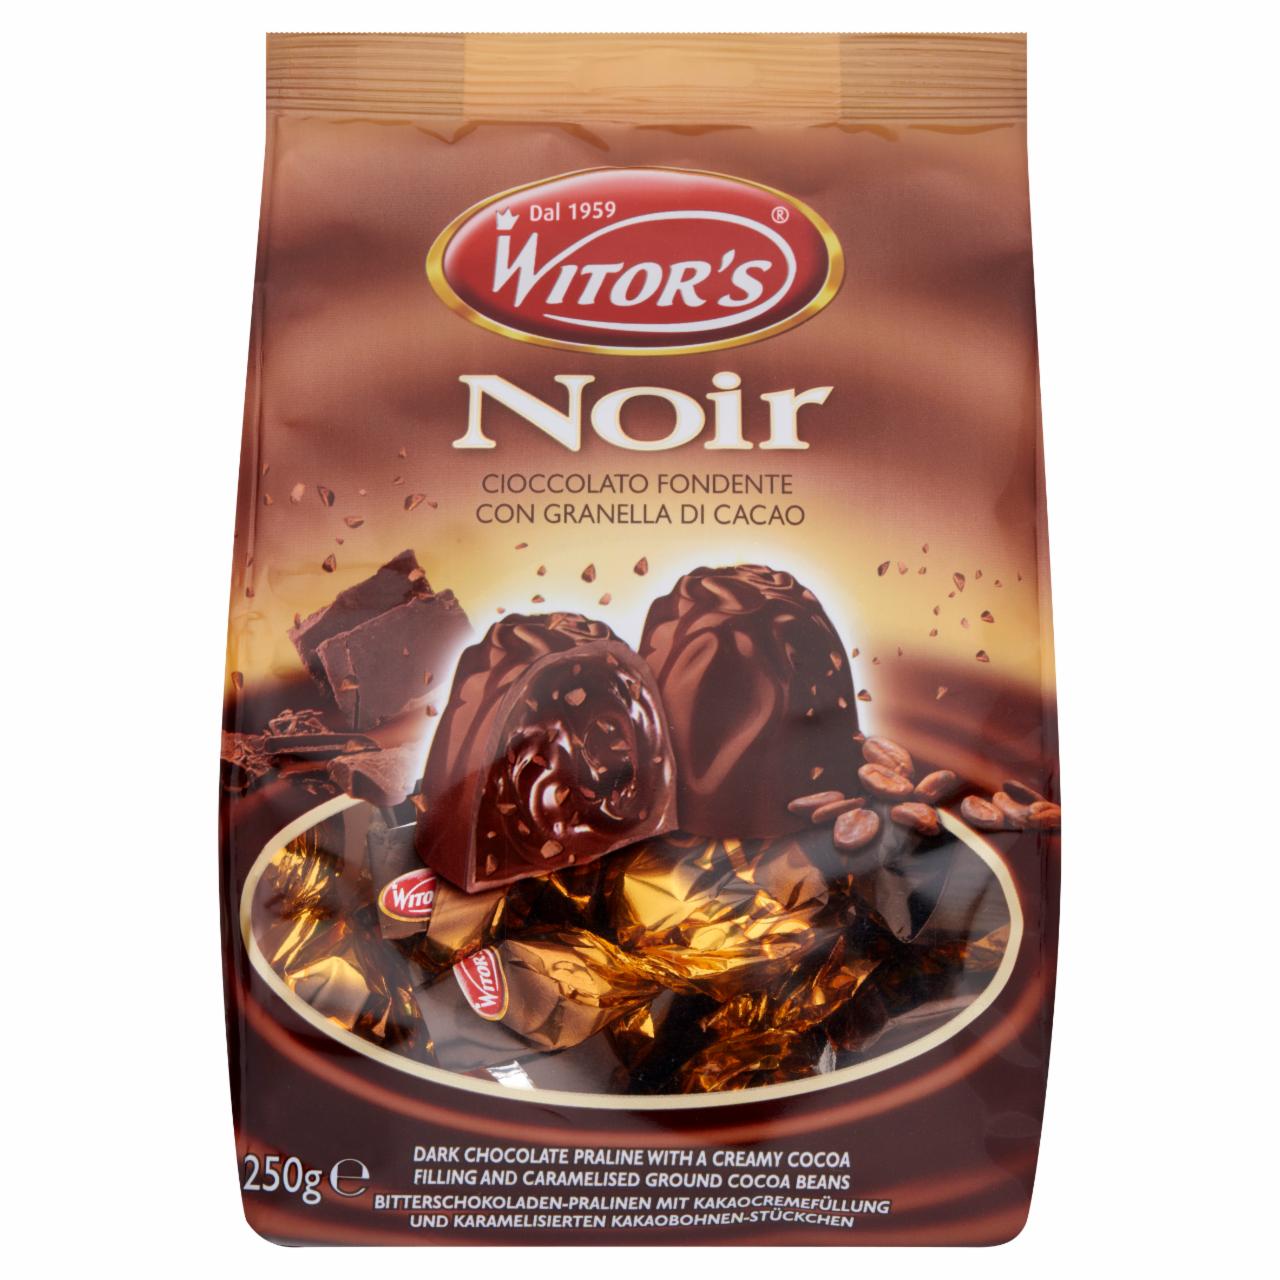 Photo - Witor's Noir Dark Chocolate Pralines with a Creamy Cocoa Filling and Ground Cocoa Beans 250 g